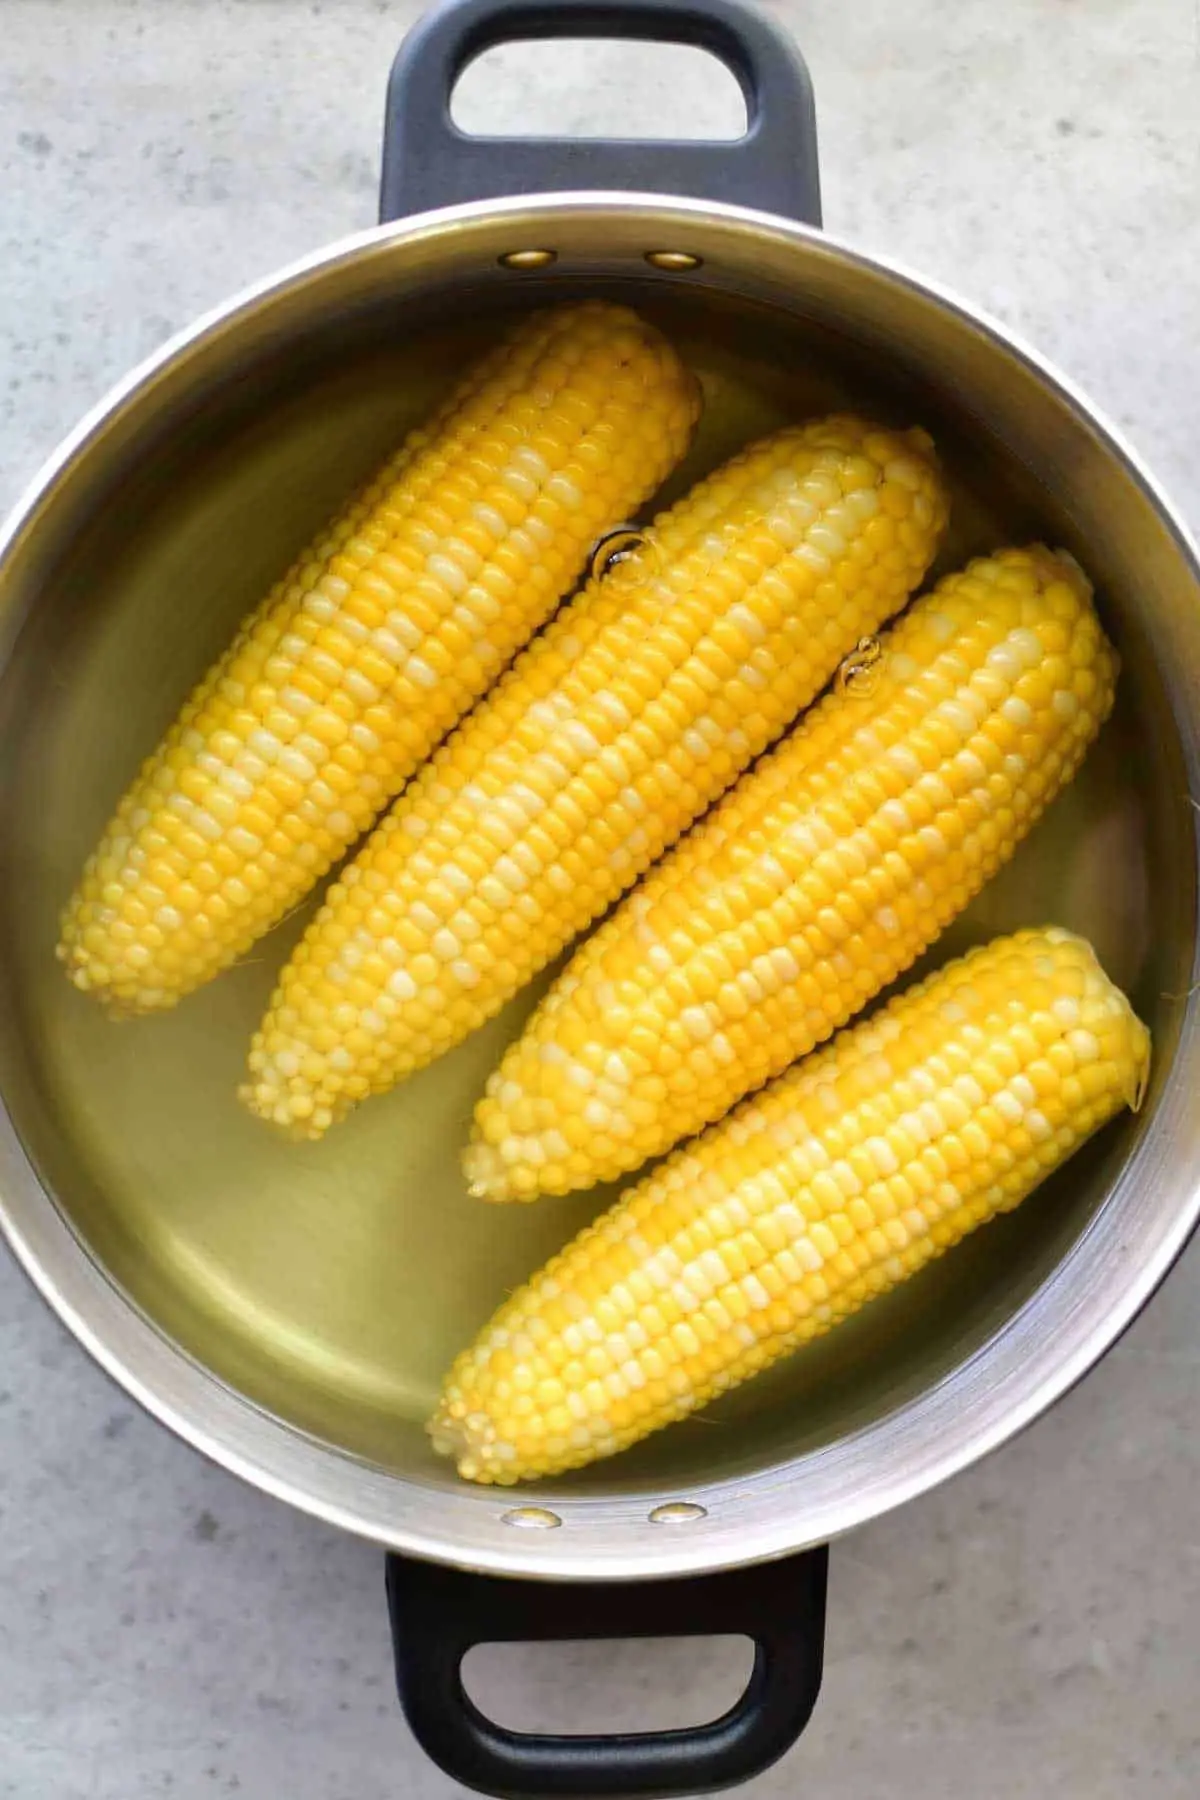 Wondering how long to boil corn on the cob? We